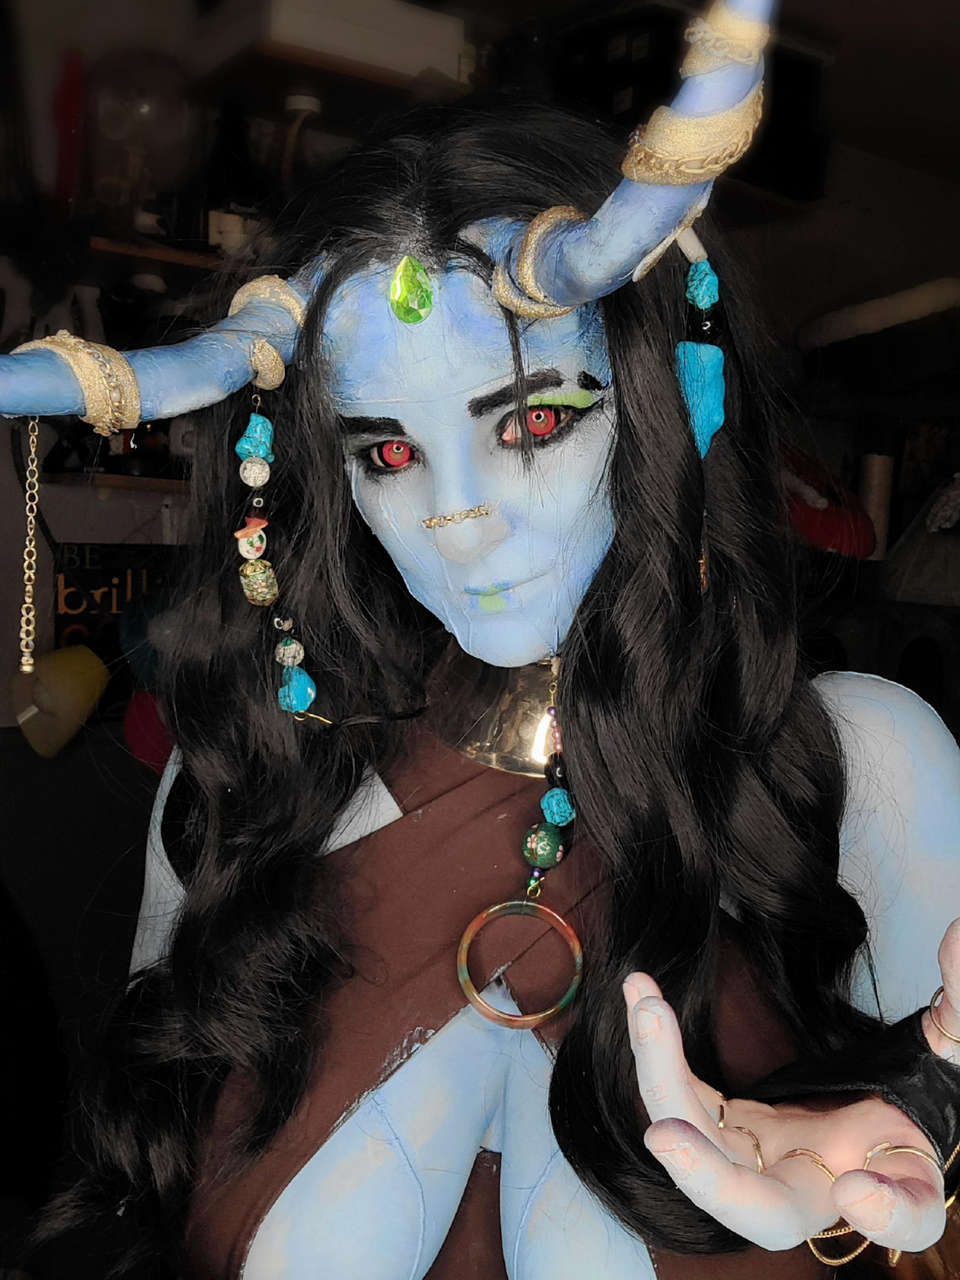 My Jotun Loki Cosplay The Horn Broke But She Is A W I P Still Love It Thoug